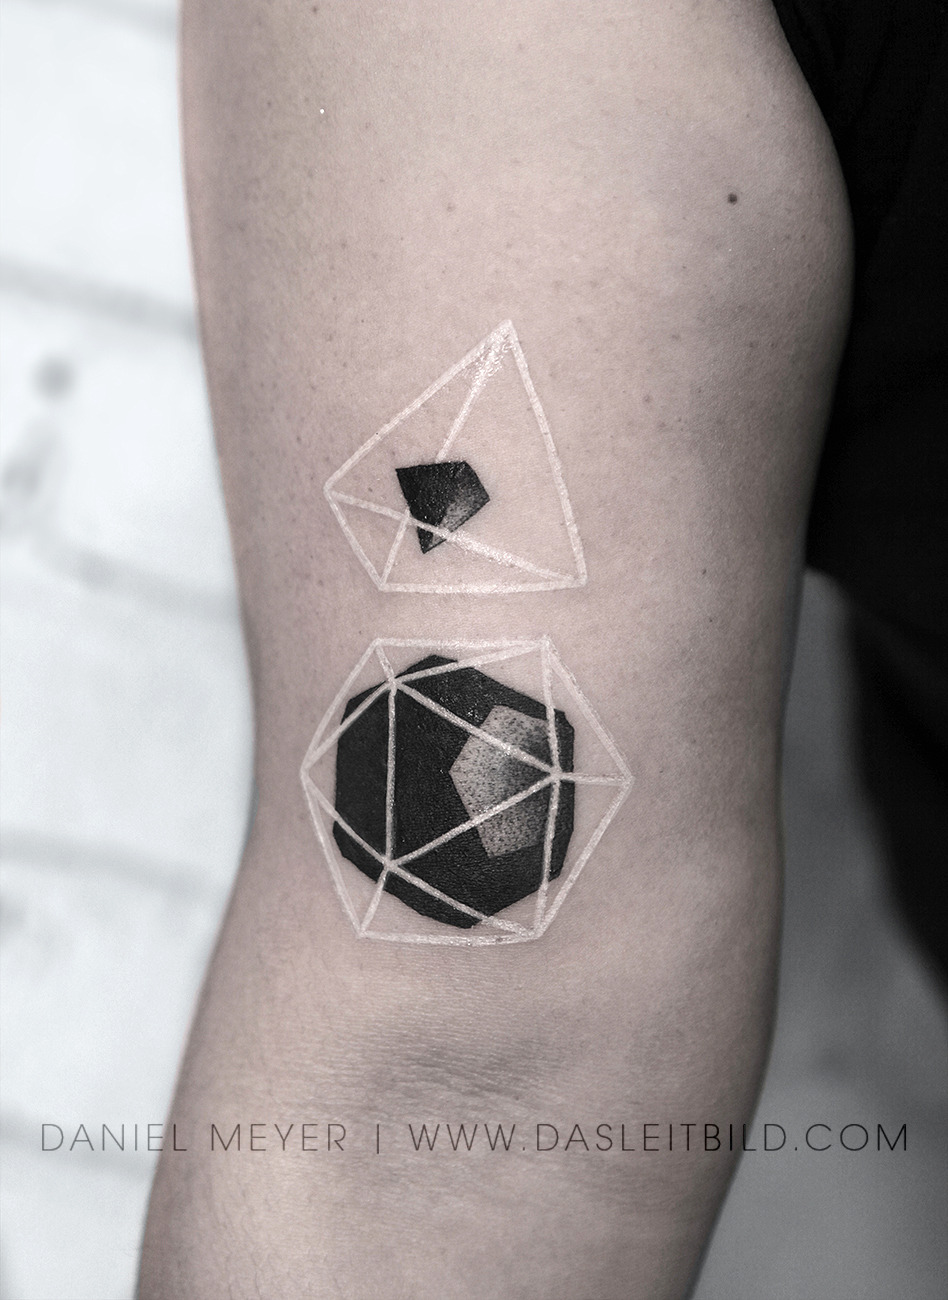 A regular dodecahedron tattoo one of the five platonic